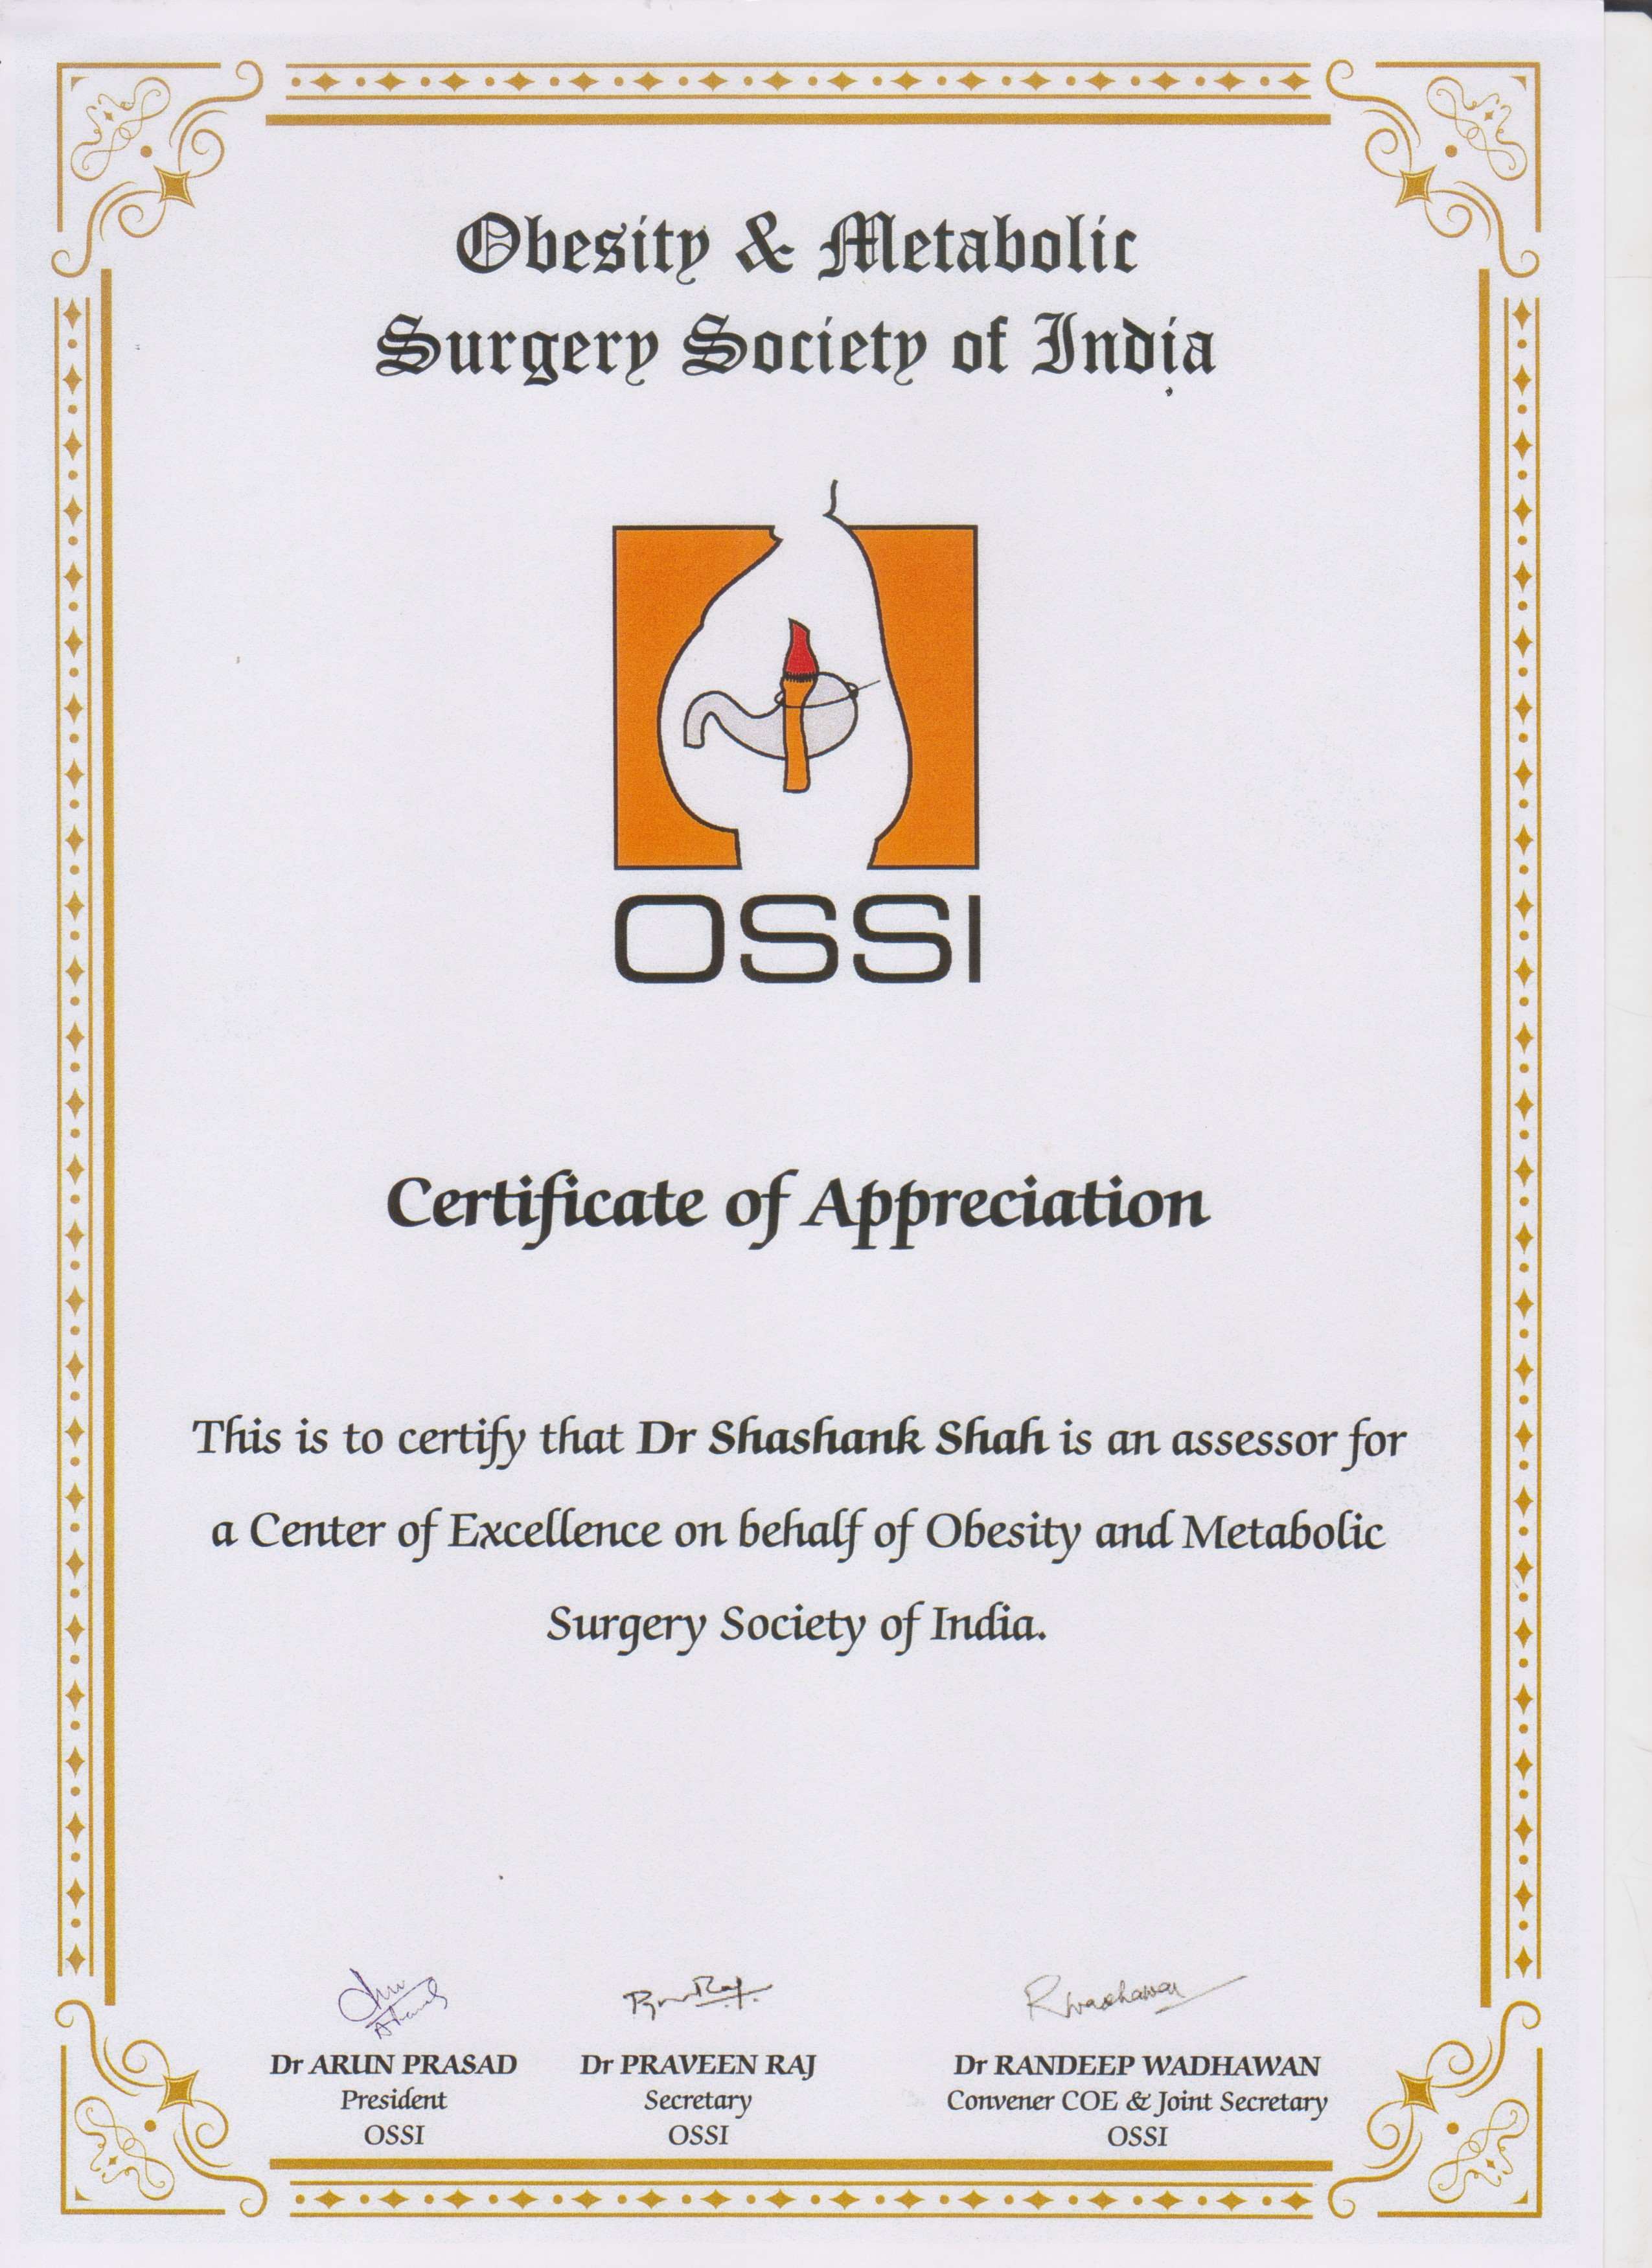 Certificate of Appreciation as an assessor for Centre of Excellence on behalf of the Obesity and Metabolic Surgery Society of India (OSSI) 